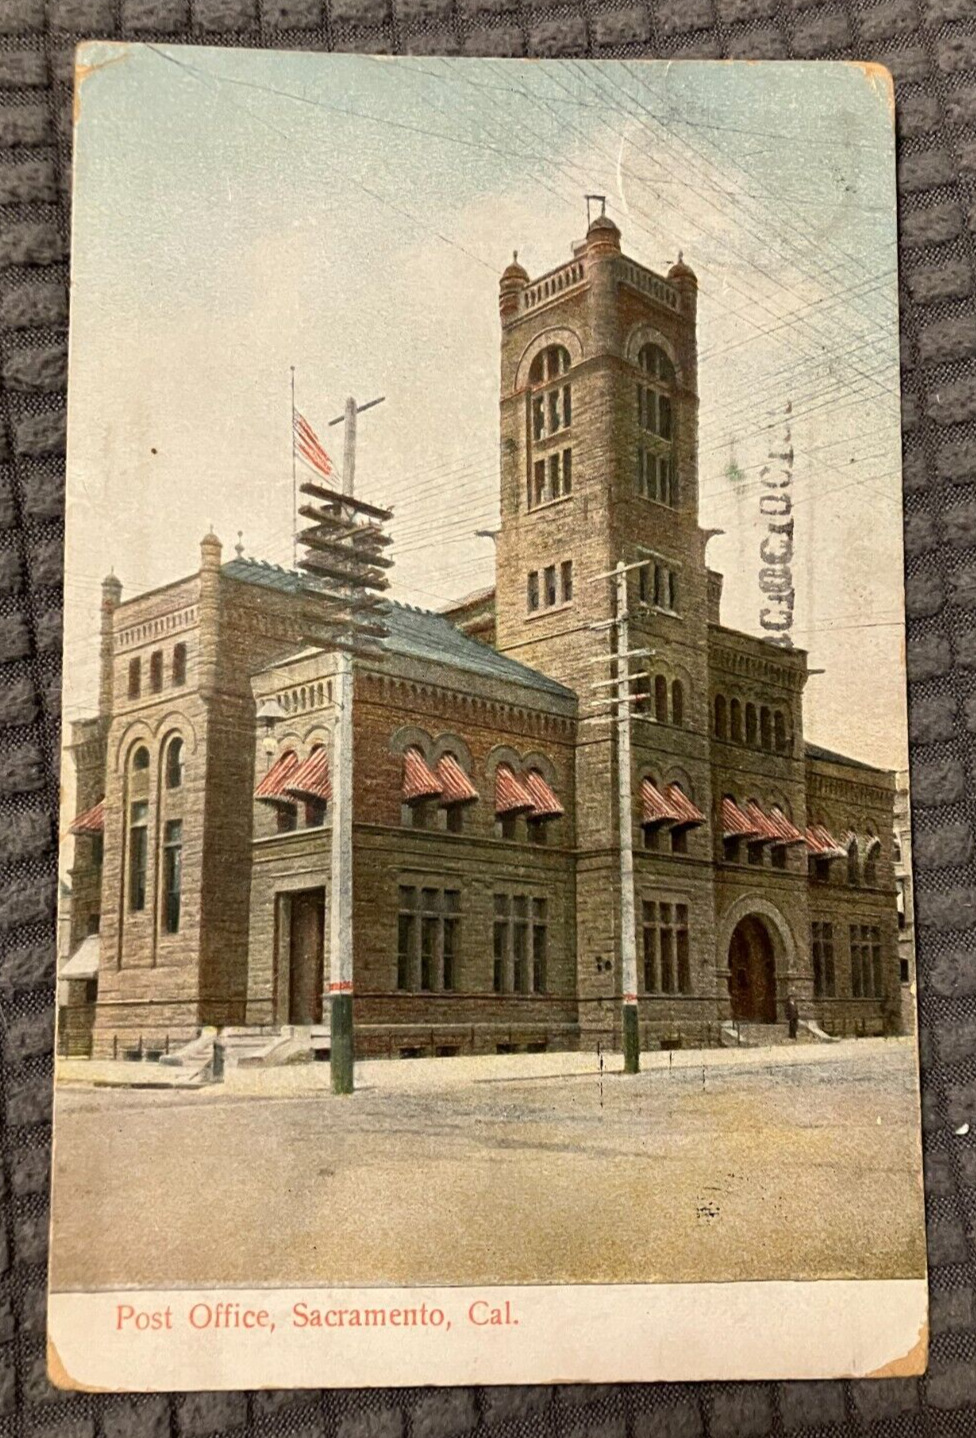 Antique Postcard - Post Office in Sacramento, California - POSTED 1909